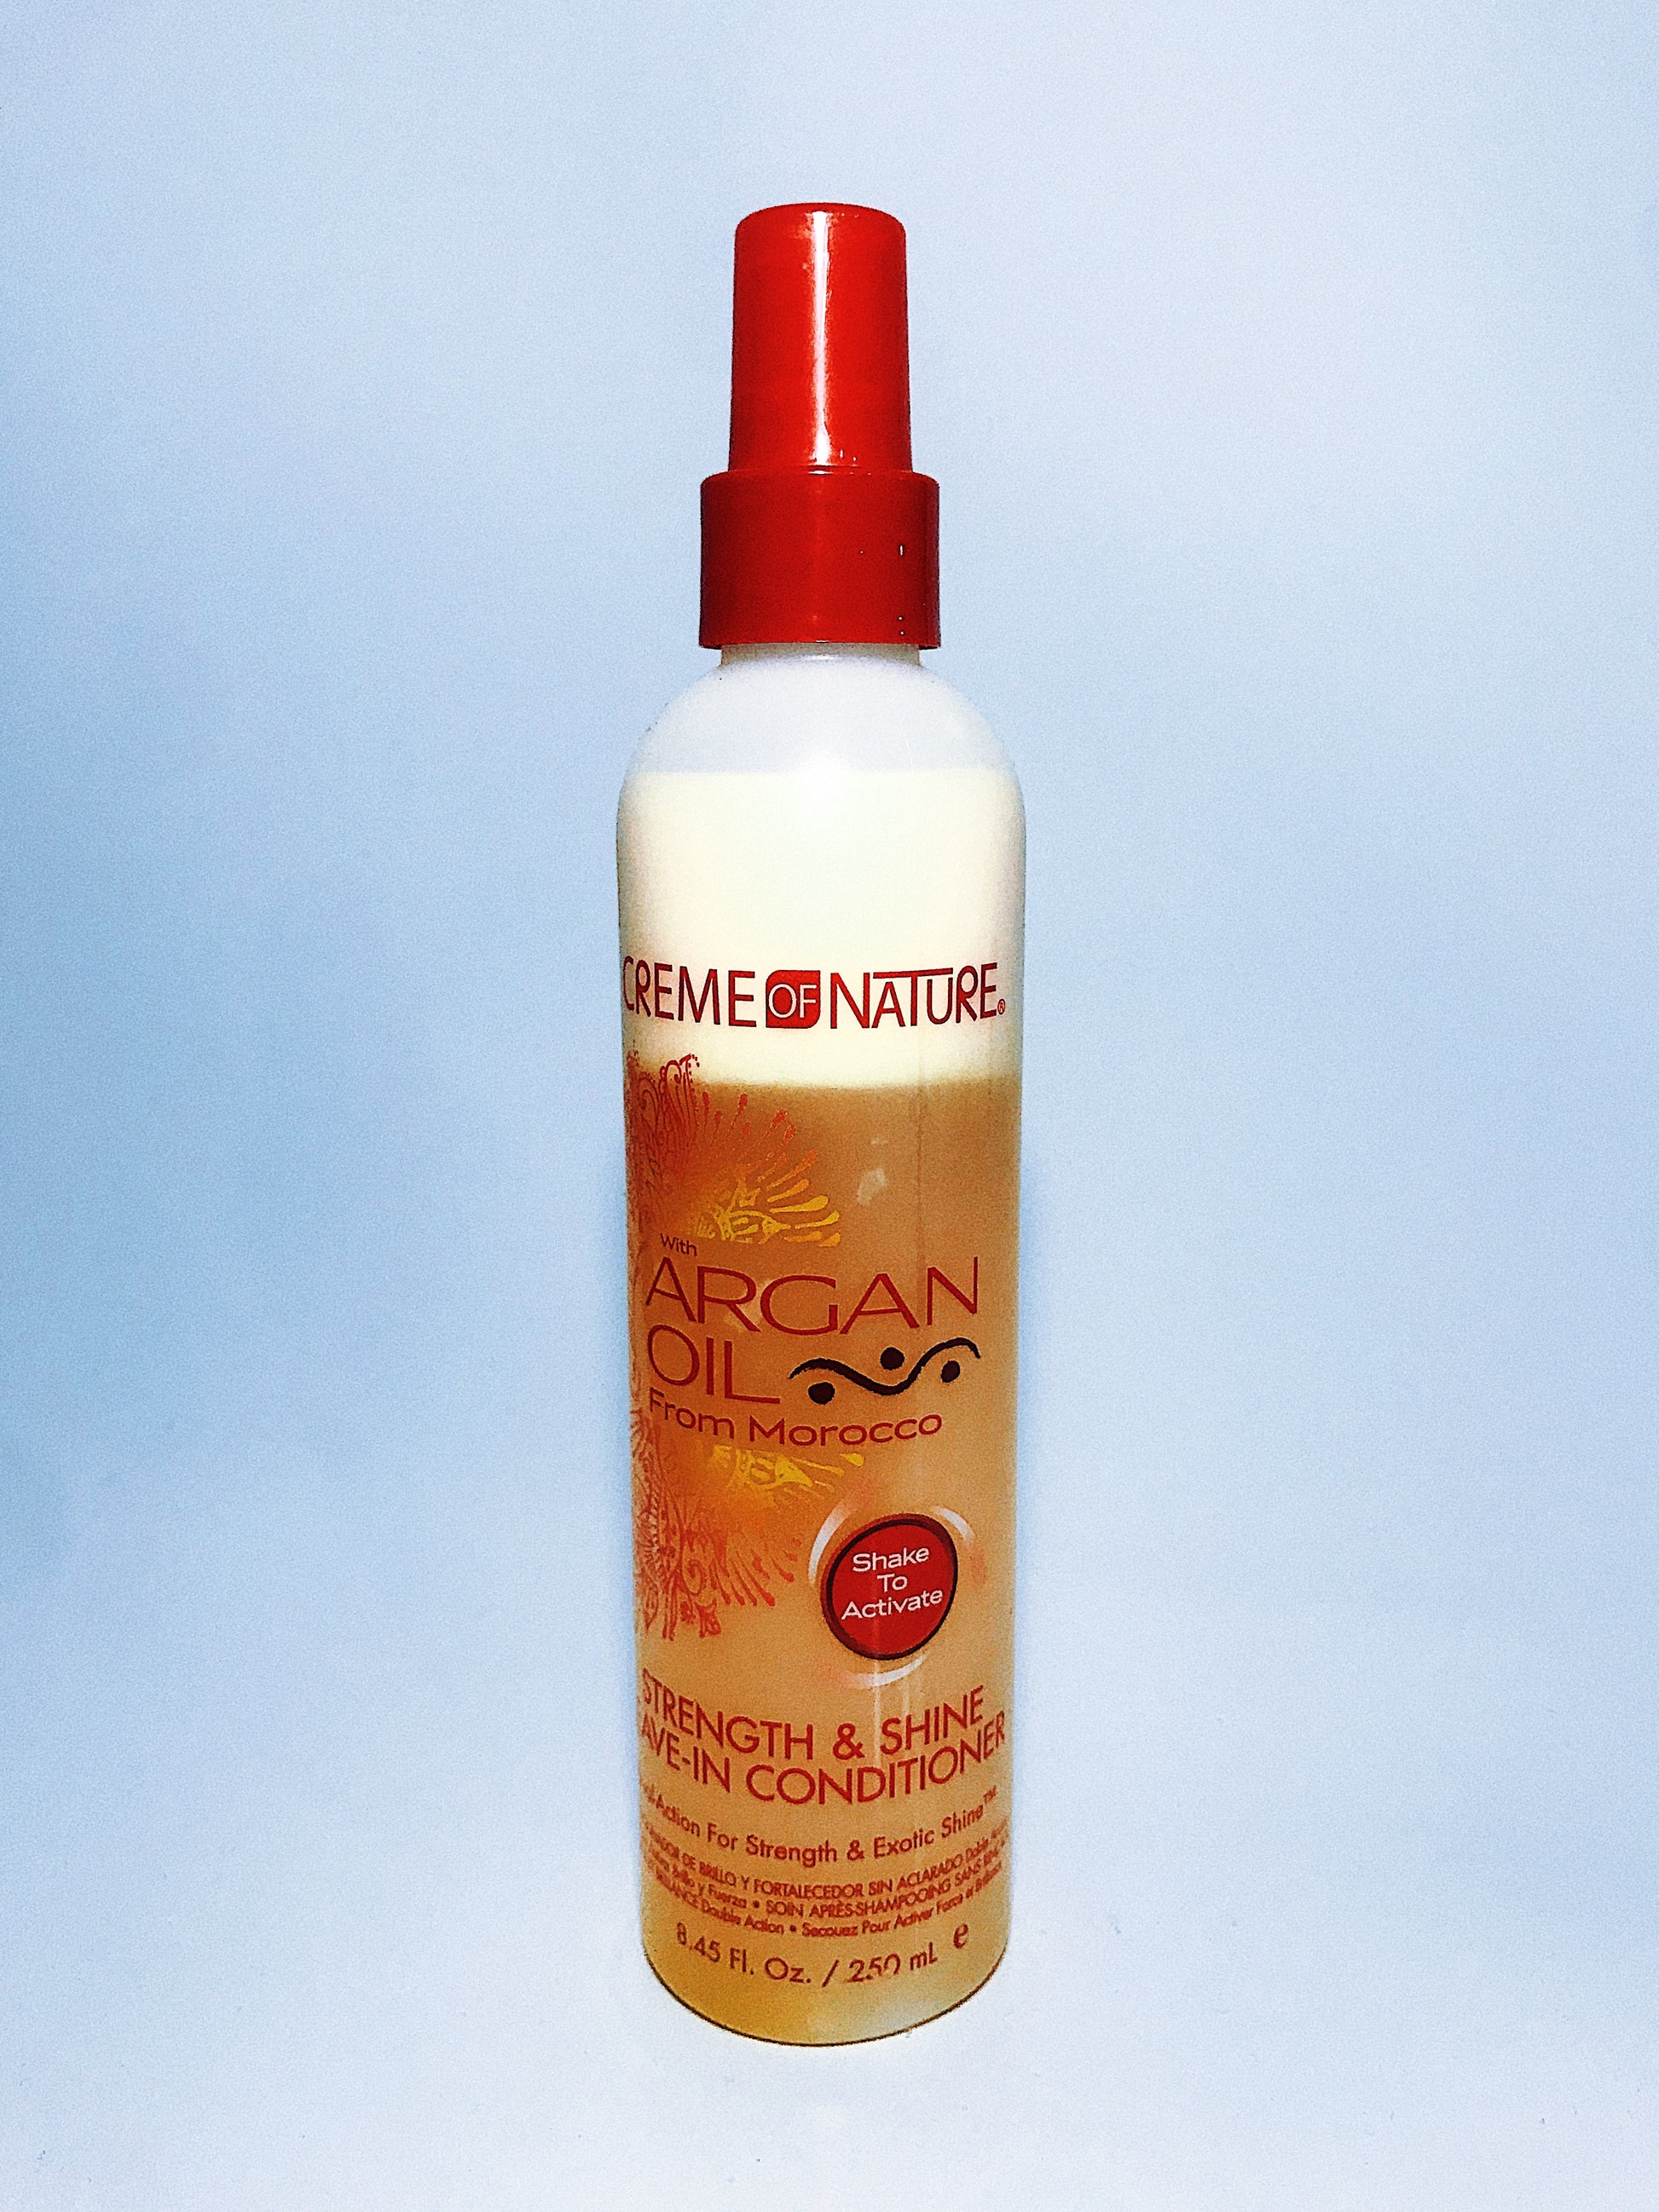 creme-of-nature-argan-oil-strenght-shine-leave-in-conditioner.jpg